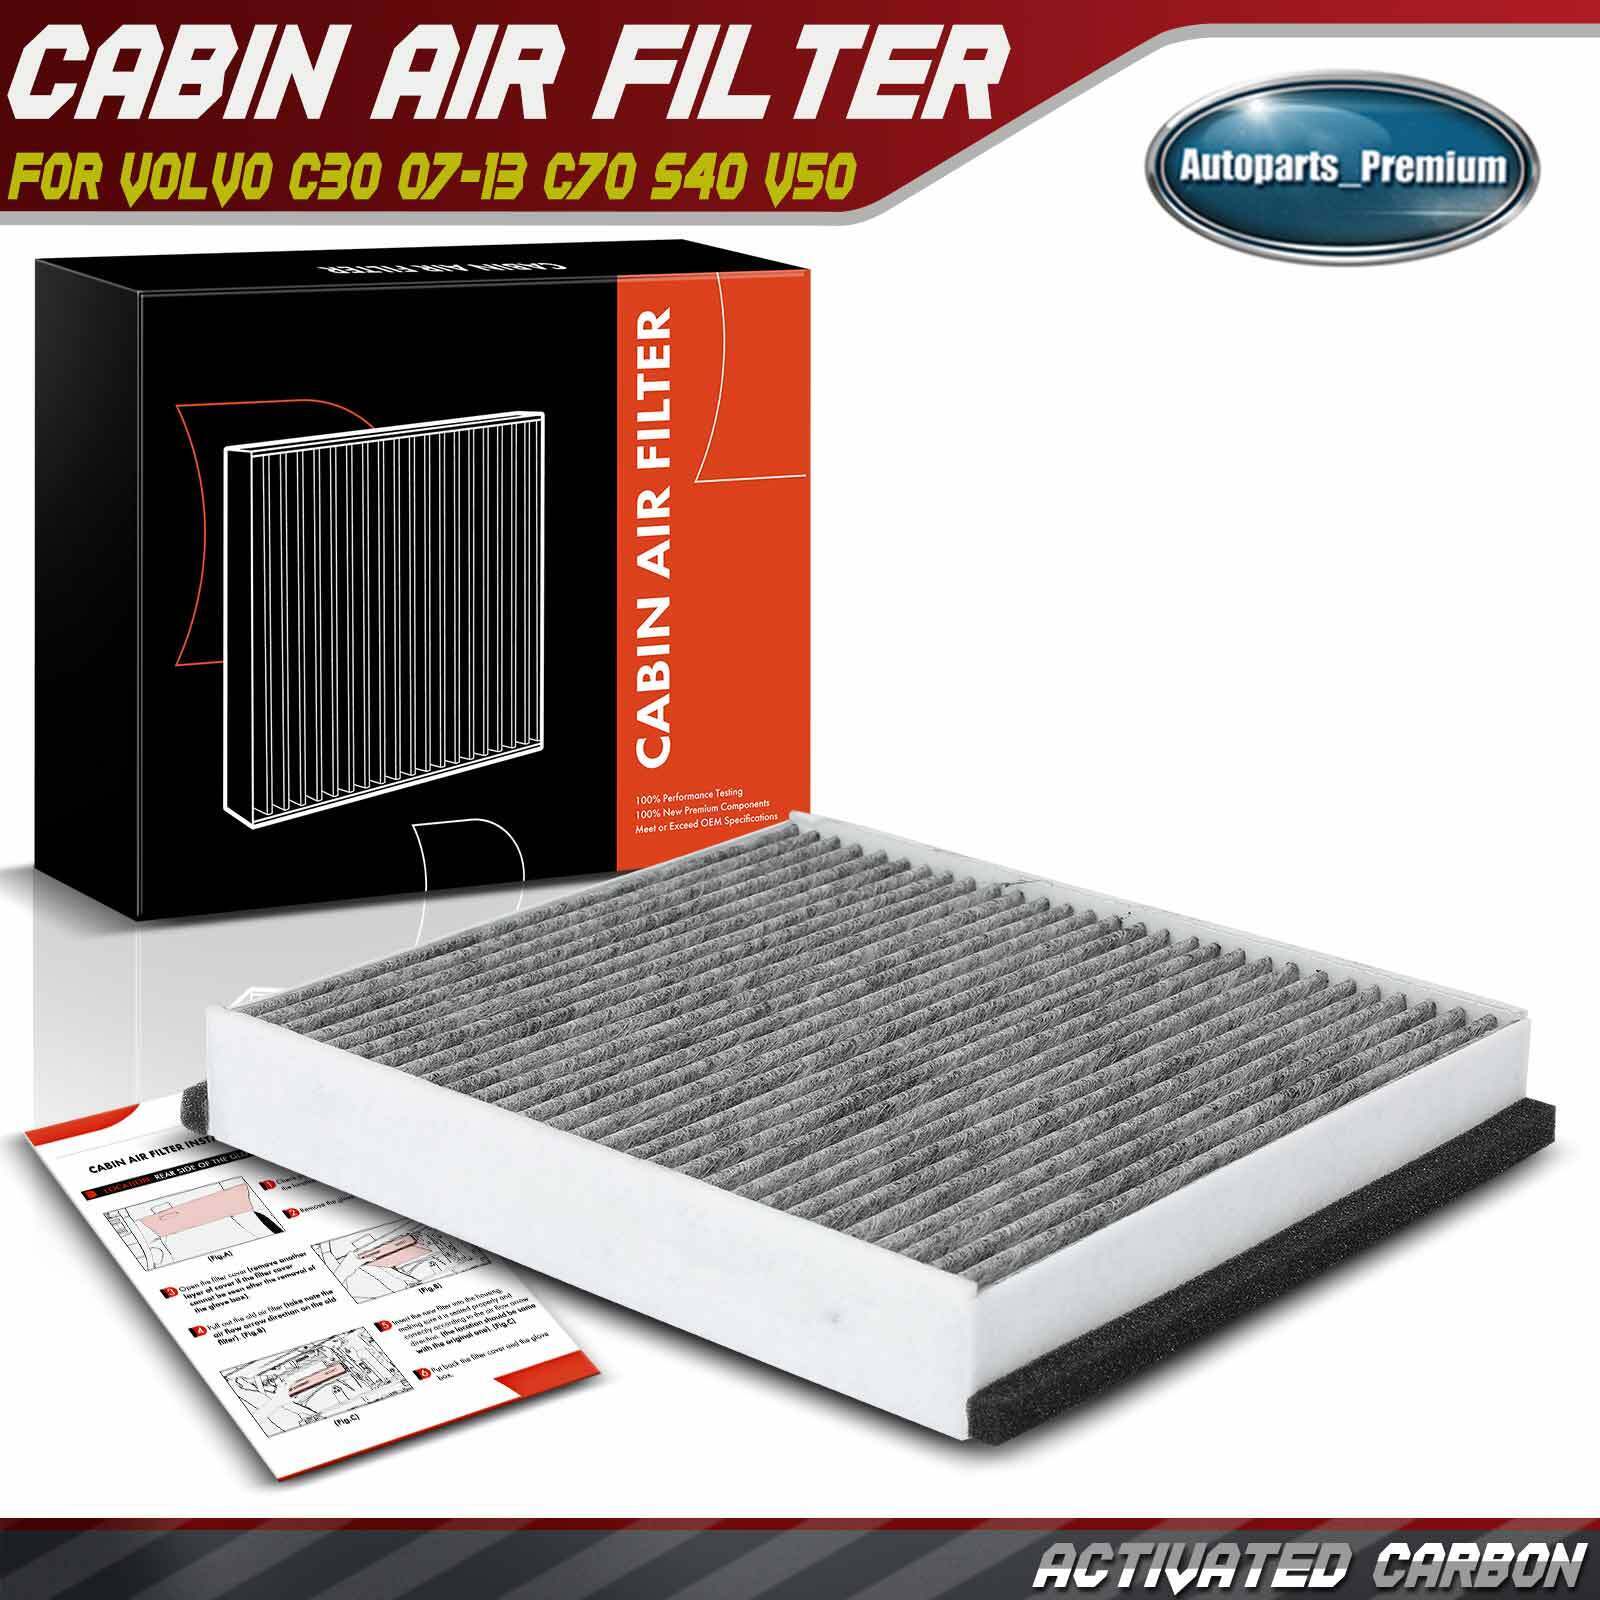 Activated Carbon Cabin Air Filter for Volvo C30 07-13 C70 06-13 S40 04-11 V50